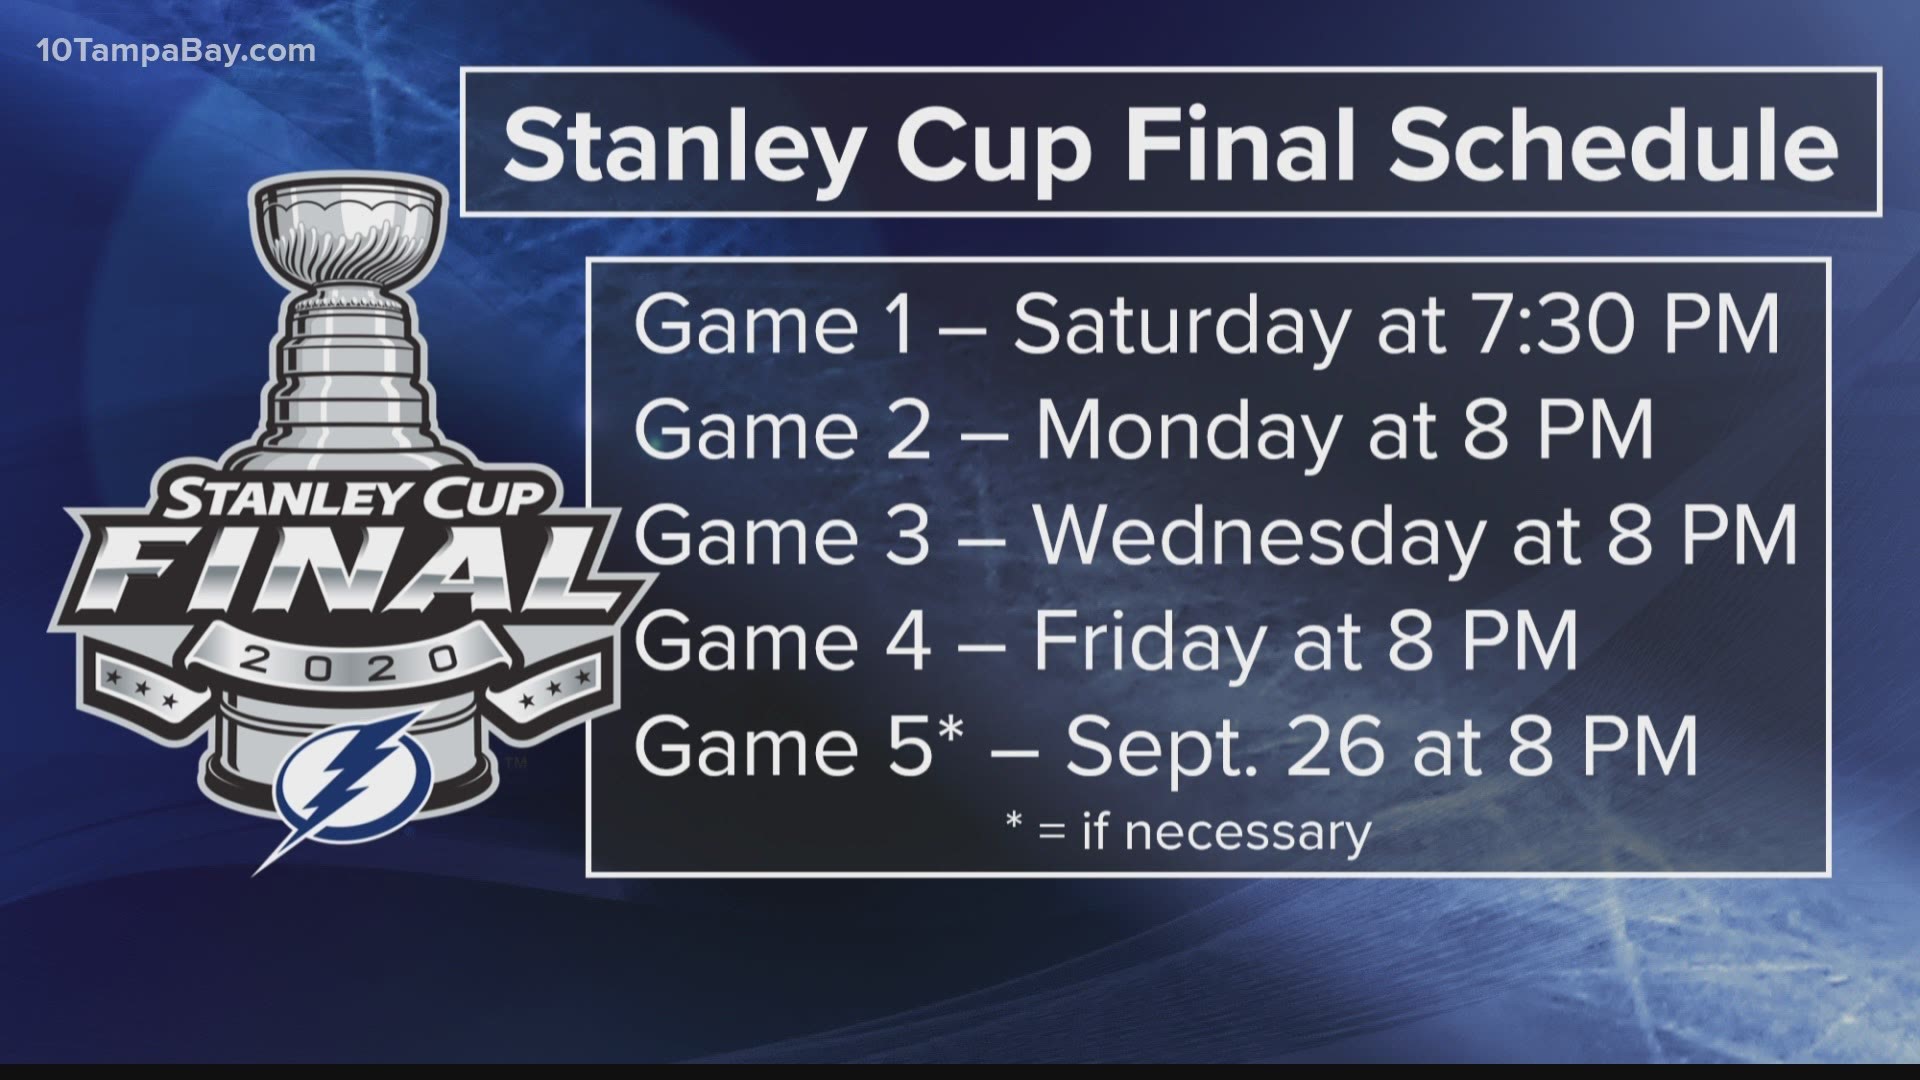 Stanley Cup Final Game 1 Live blog